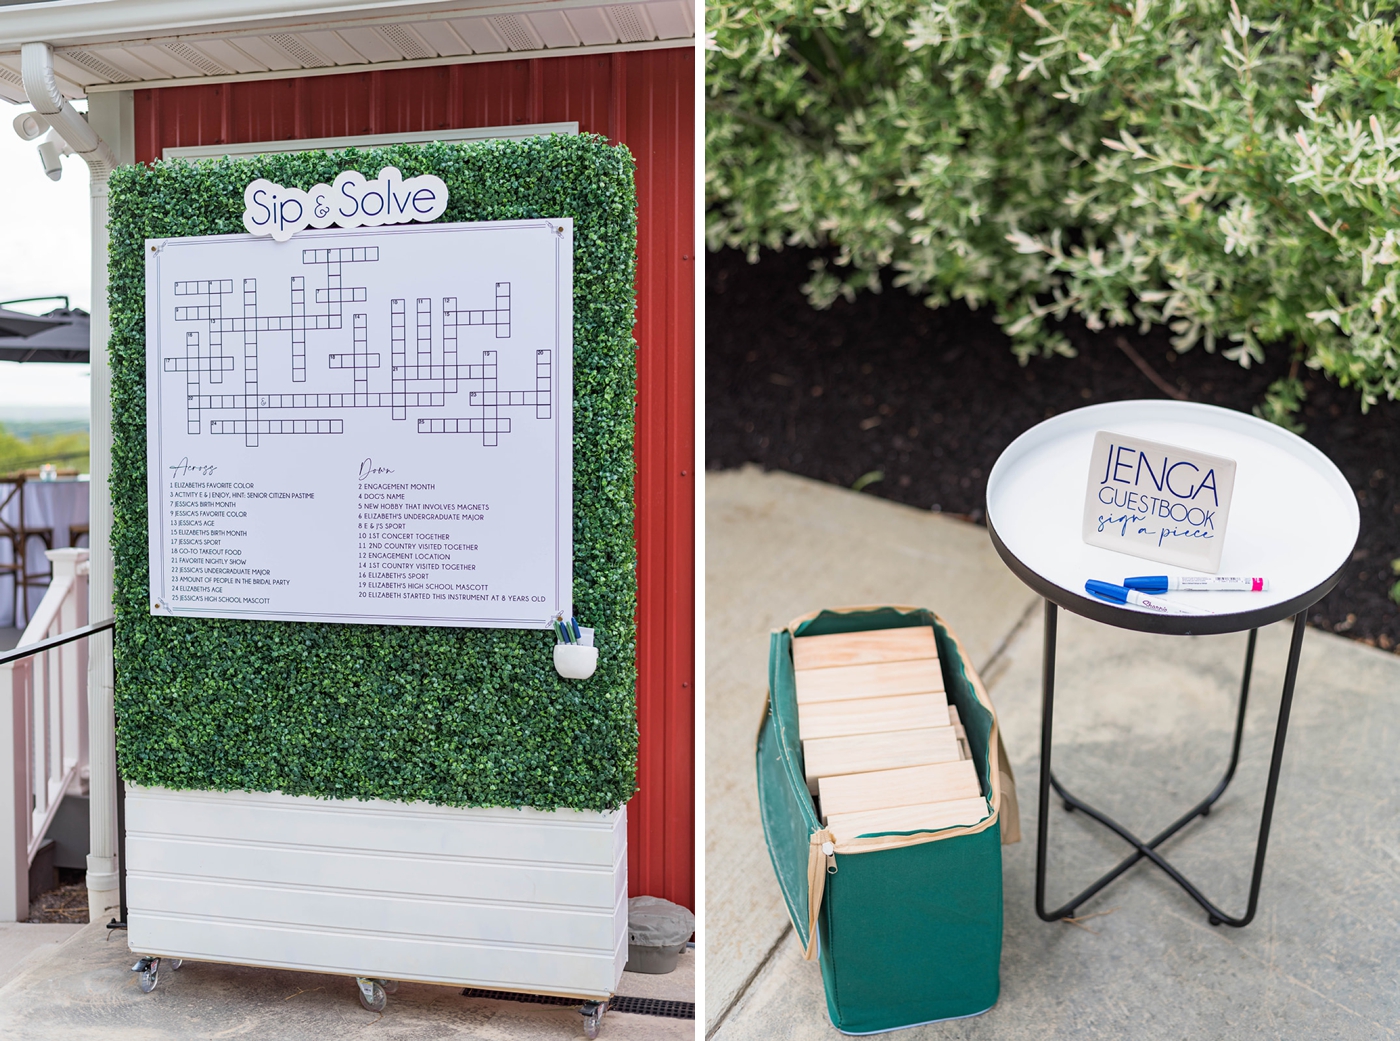 Jenga guestbook and a crossword puzzle with trivia about the couple at a wedding reception